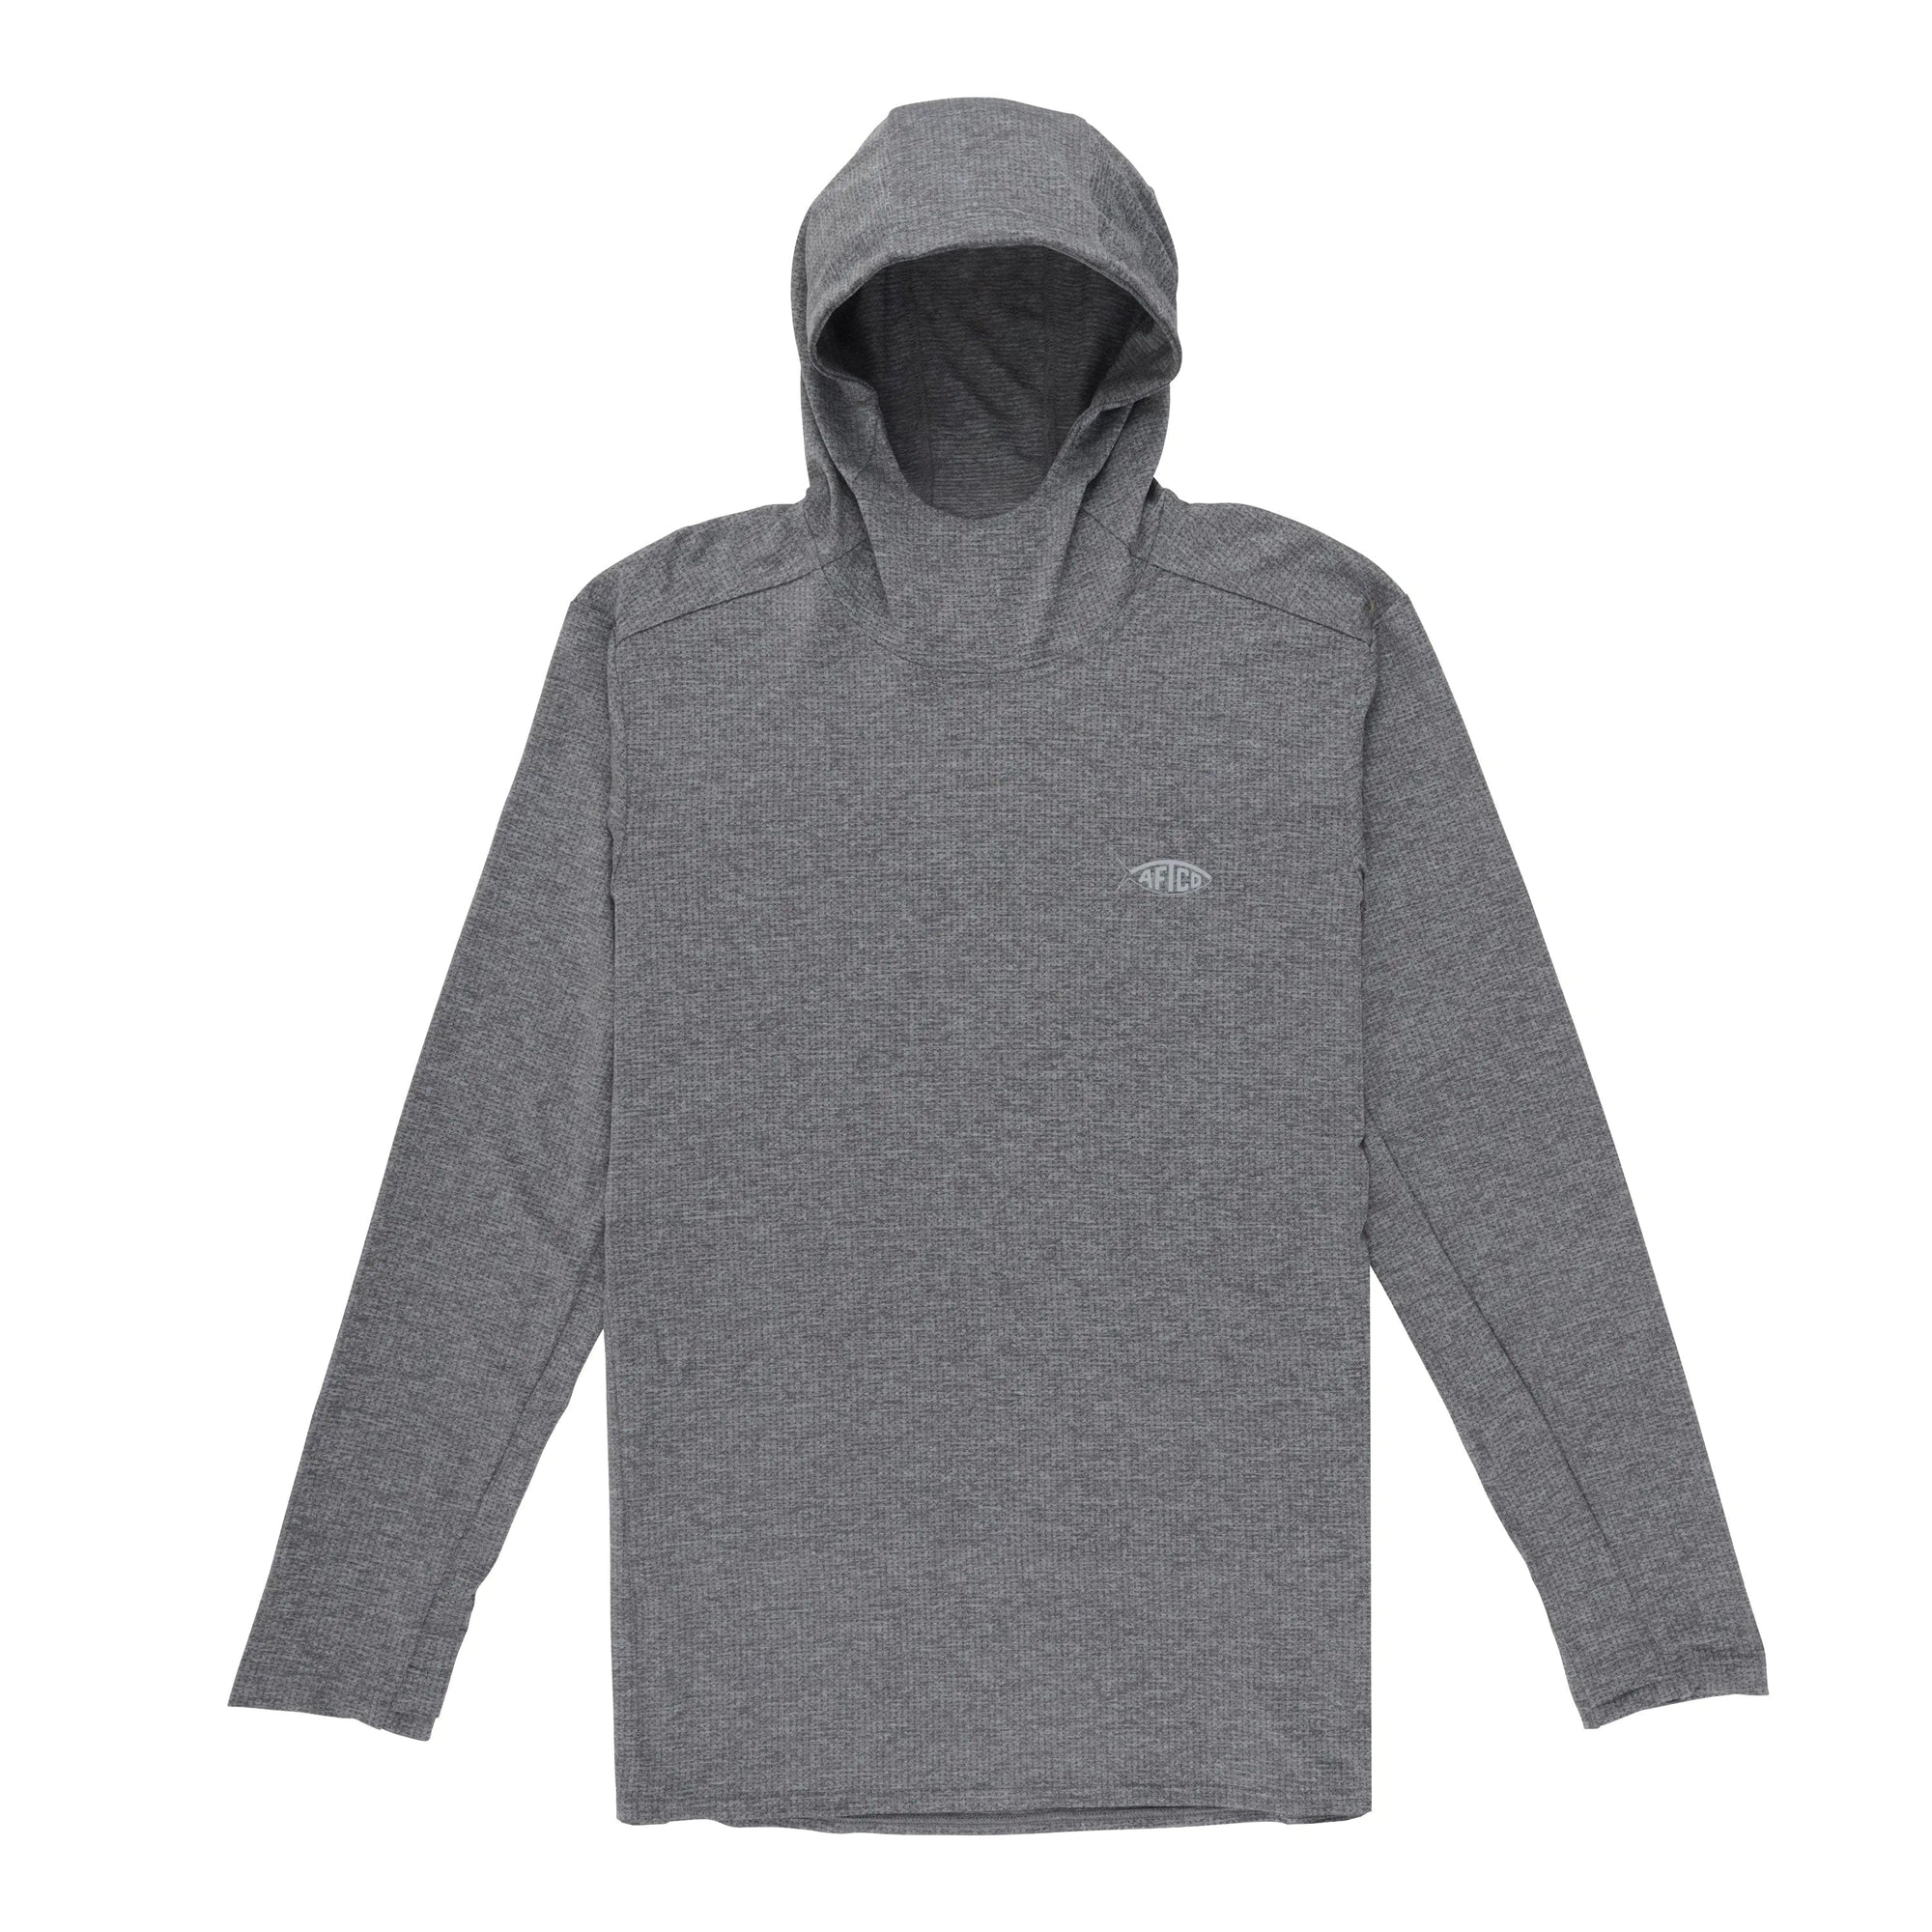 Aftco Rescue HD Sun Protection Hoodie Charcoal Heather / Medium